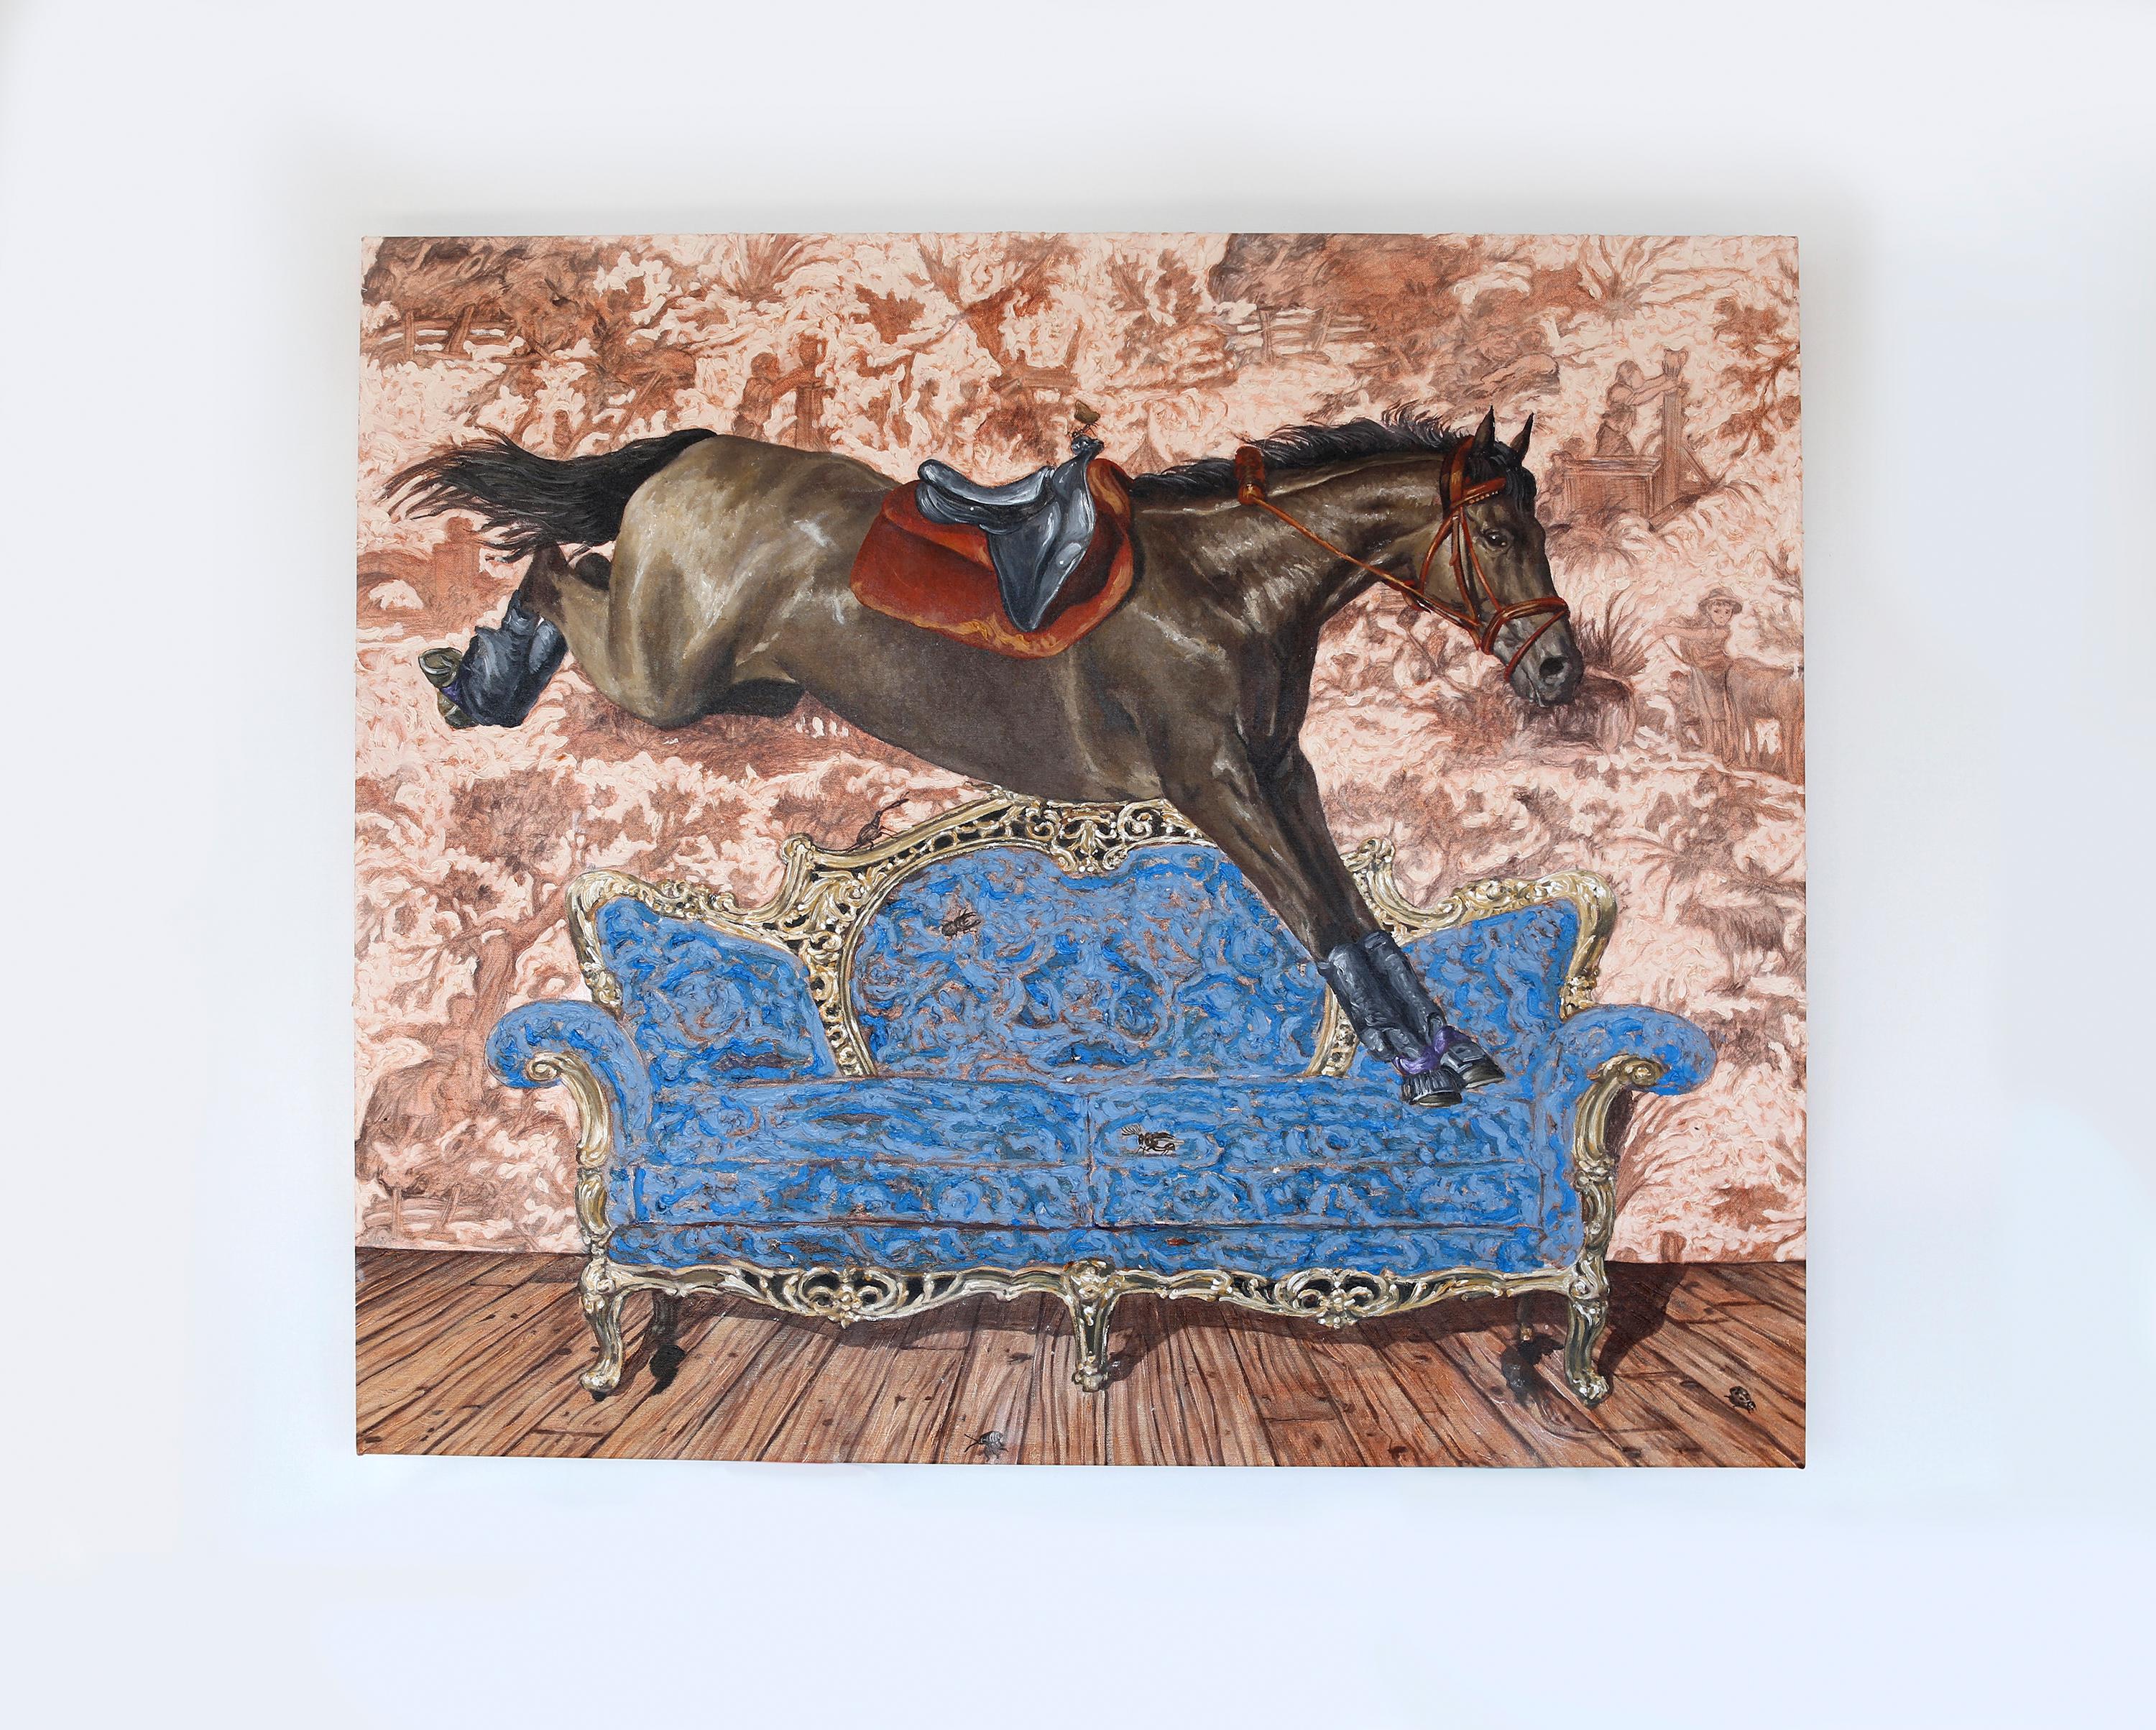 Equestrian Style and Decor II - Contemporary  surrealistic horse painting - Painting by Carlos Gamez De Francisco